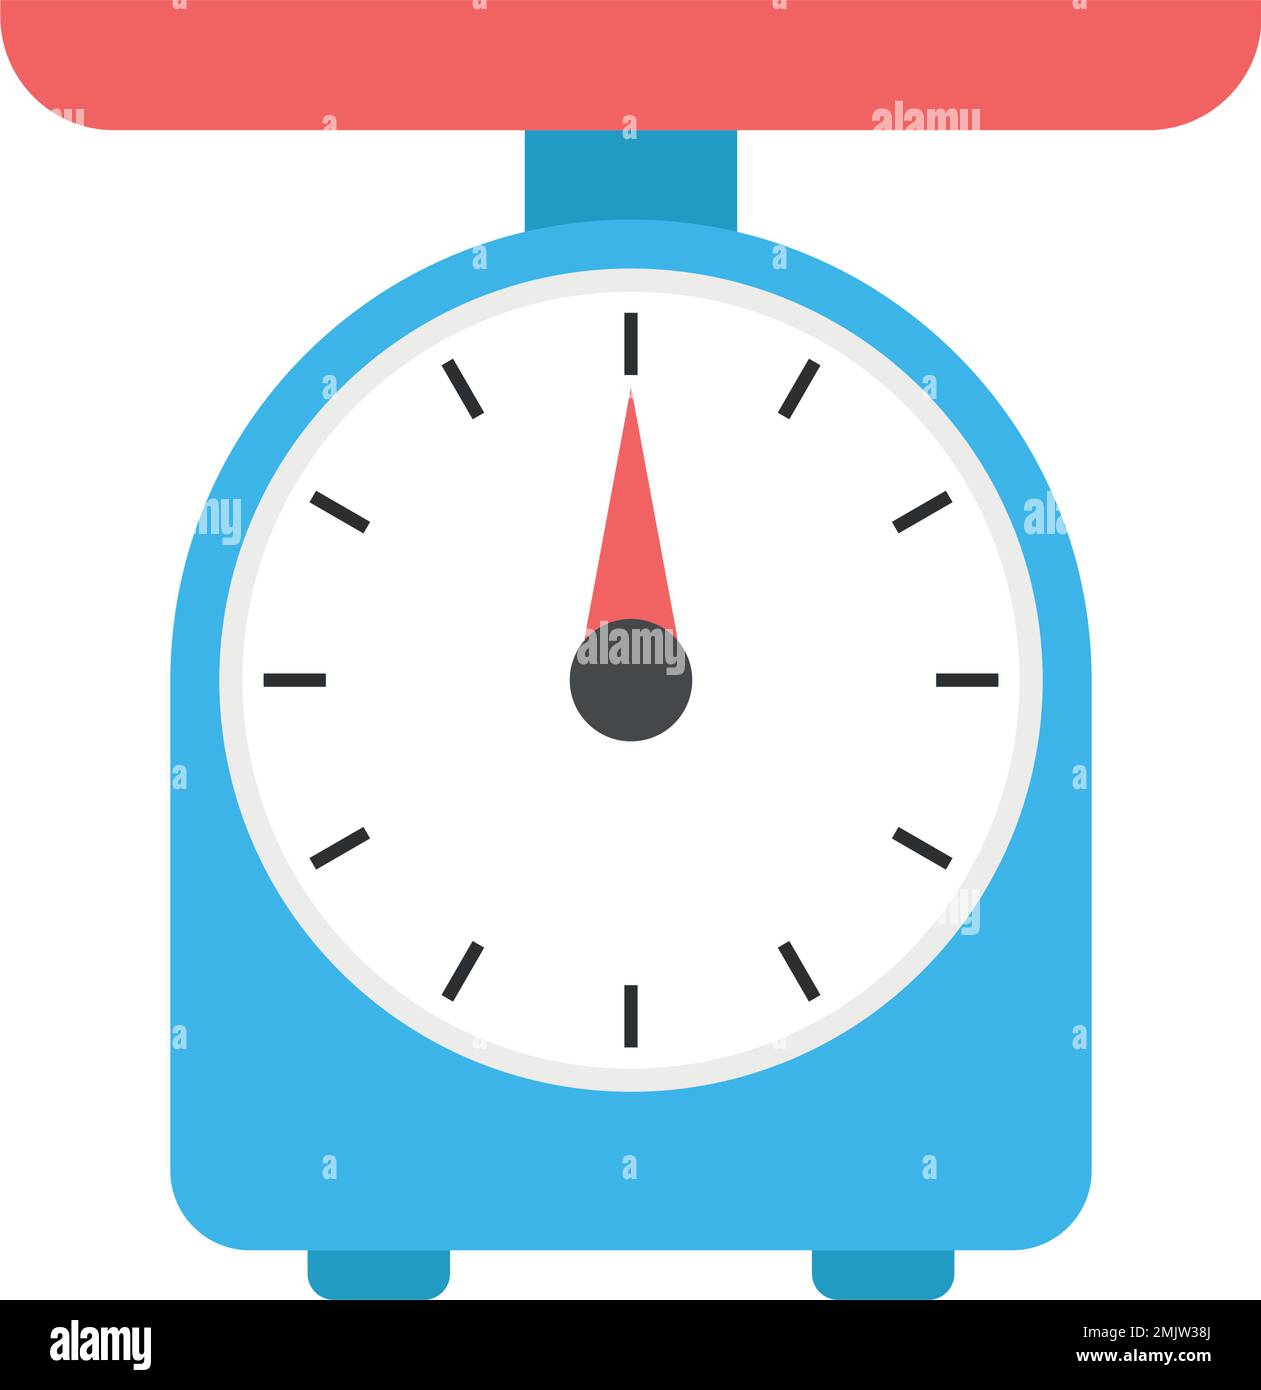 https://c8.alamy.com/comp/2MJW38J/scale-icon-in-flat-style-weight-balance-vector-illustration-on-isolated-background-equilibrium-comparison-sign-business-concept-2MJW38J.jpg